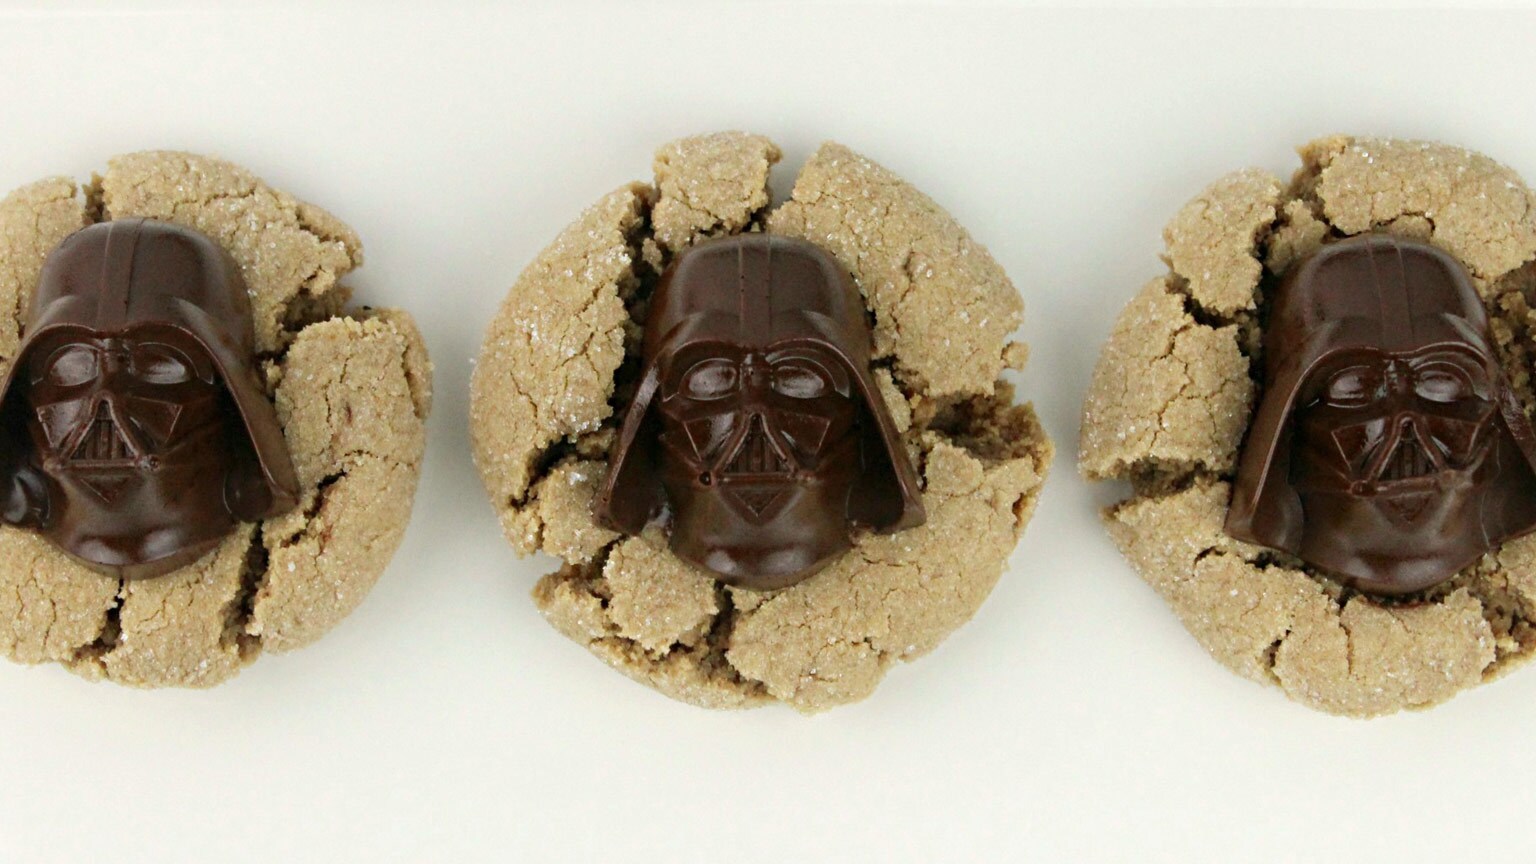 Have a Most Impressive Father's Day with These Darth Vader Peanut Butter Blossom Cookies